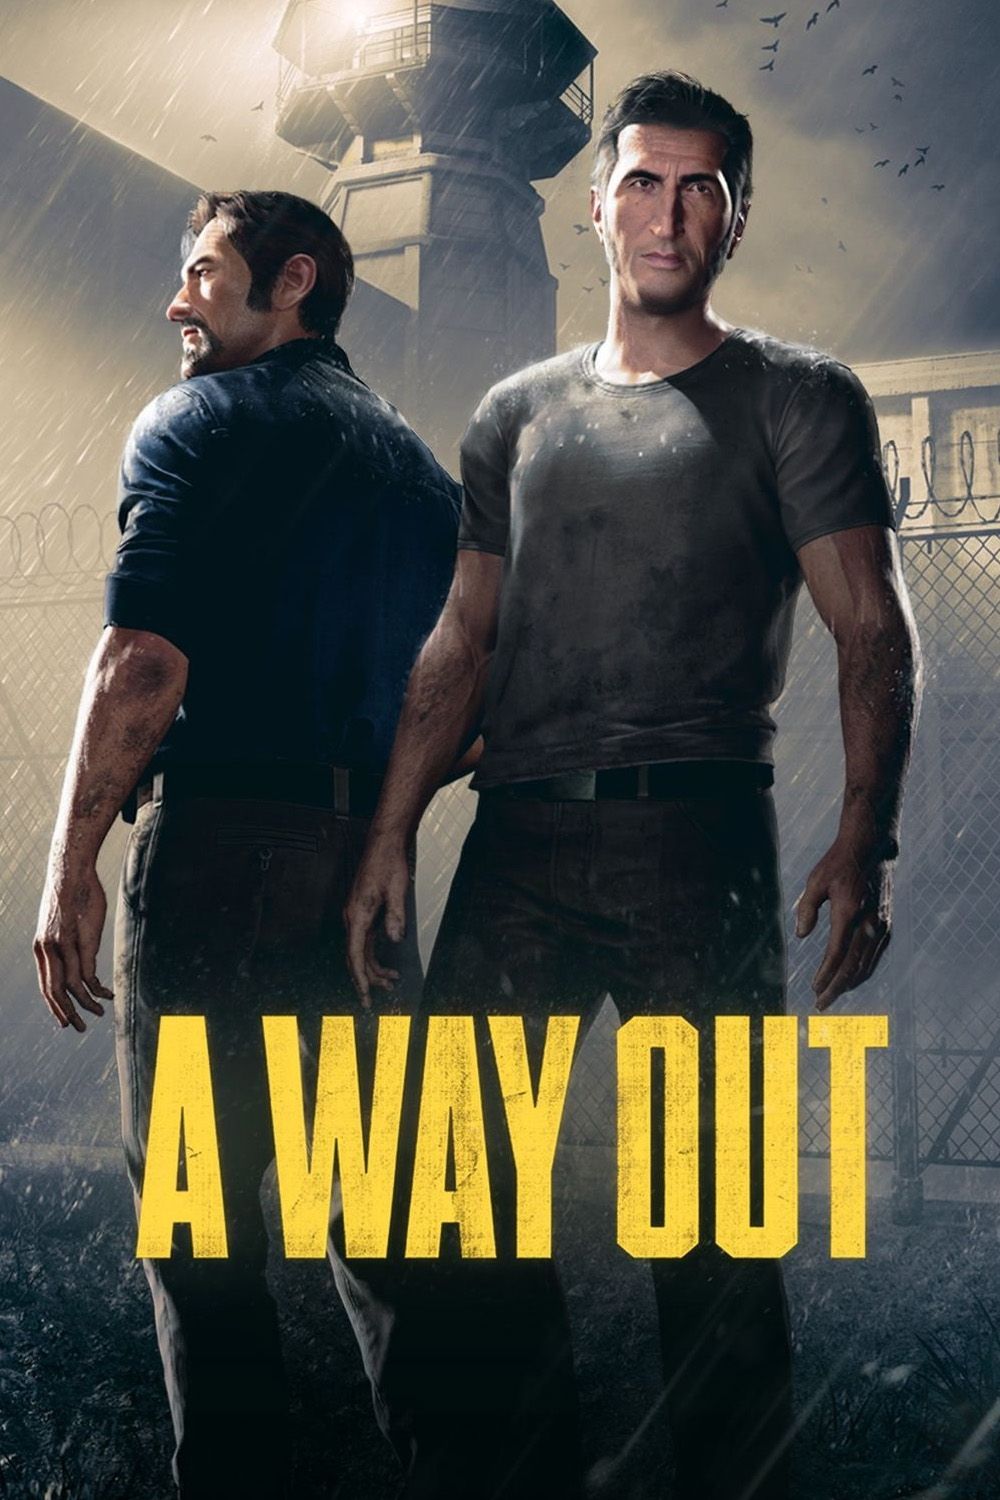 A Way Out game imdb